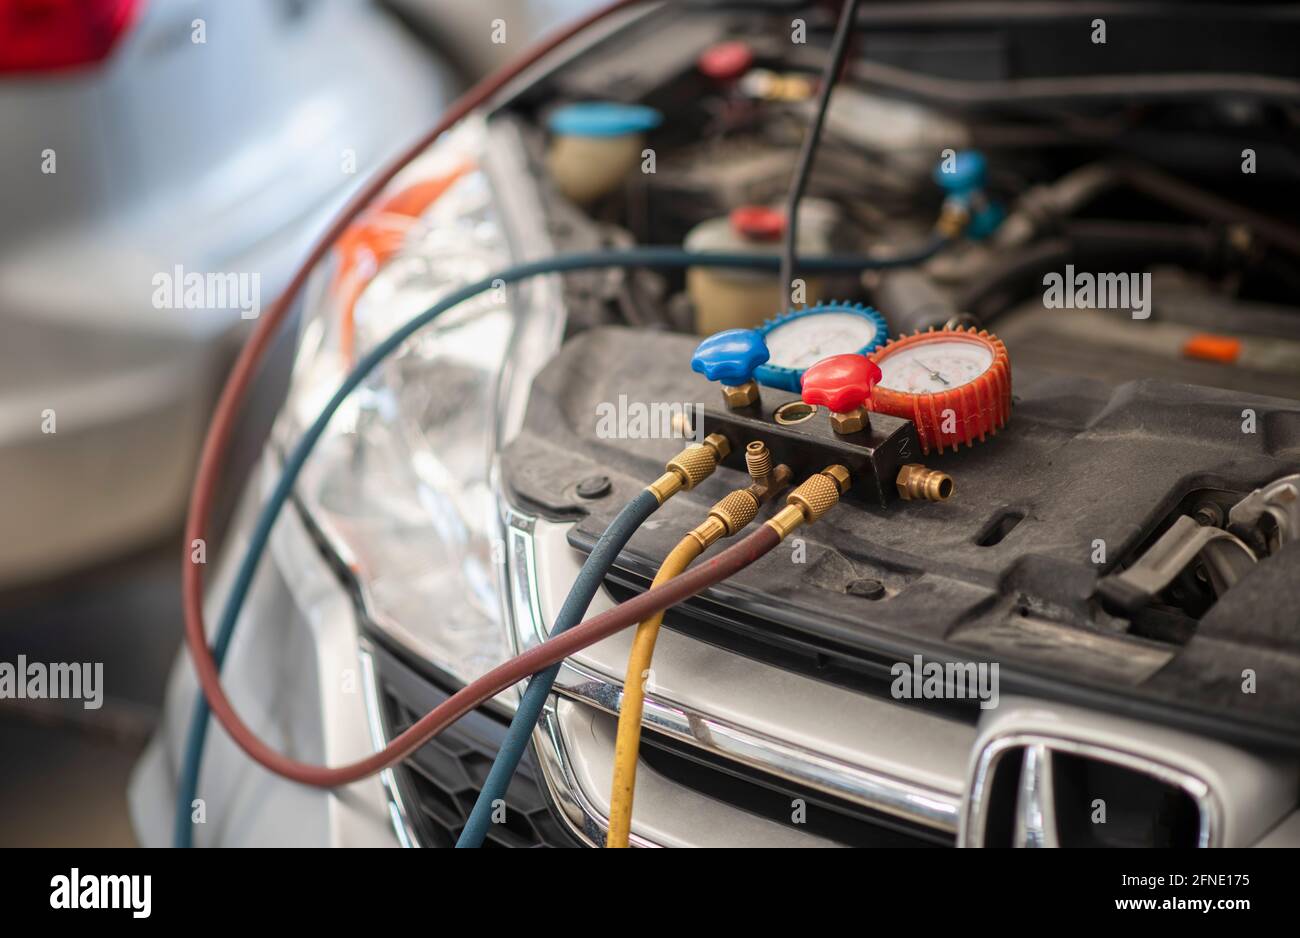 Car Air Conditioner Outlet Stock Photo, Picture and Royalty Free